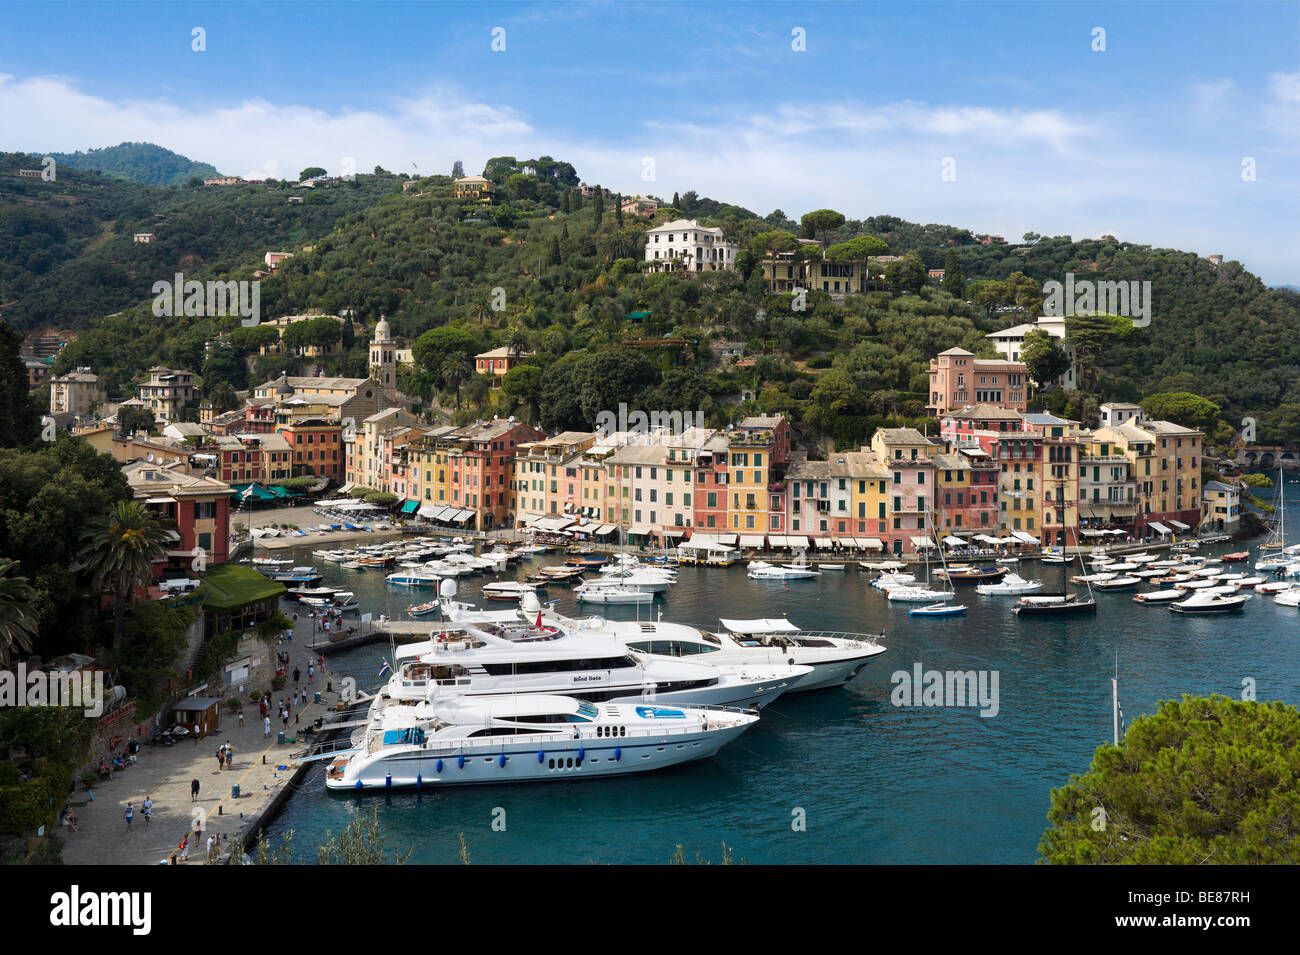 Luxury yachts in the harbour at Portofino with the town behind, Italian Riviera, Liguria, Italy Stock Photo